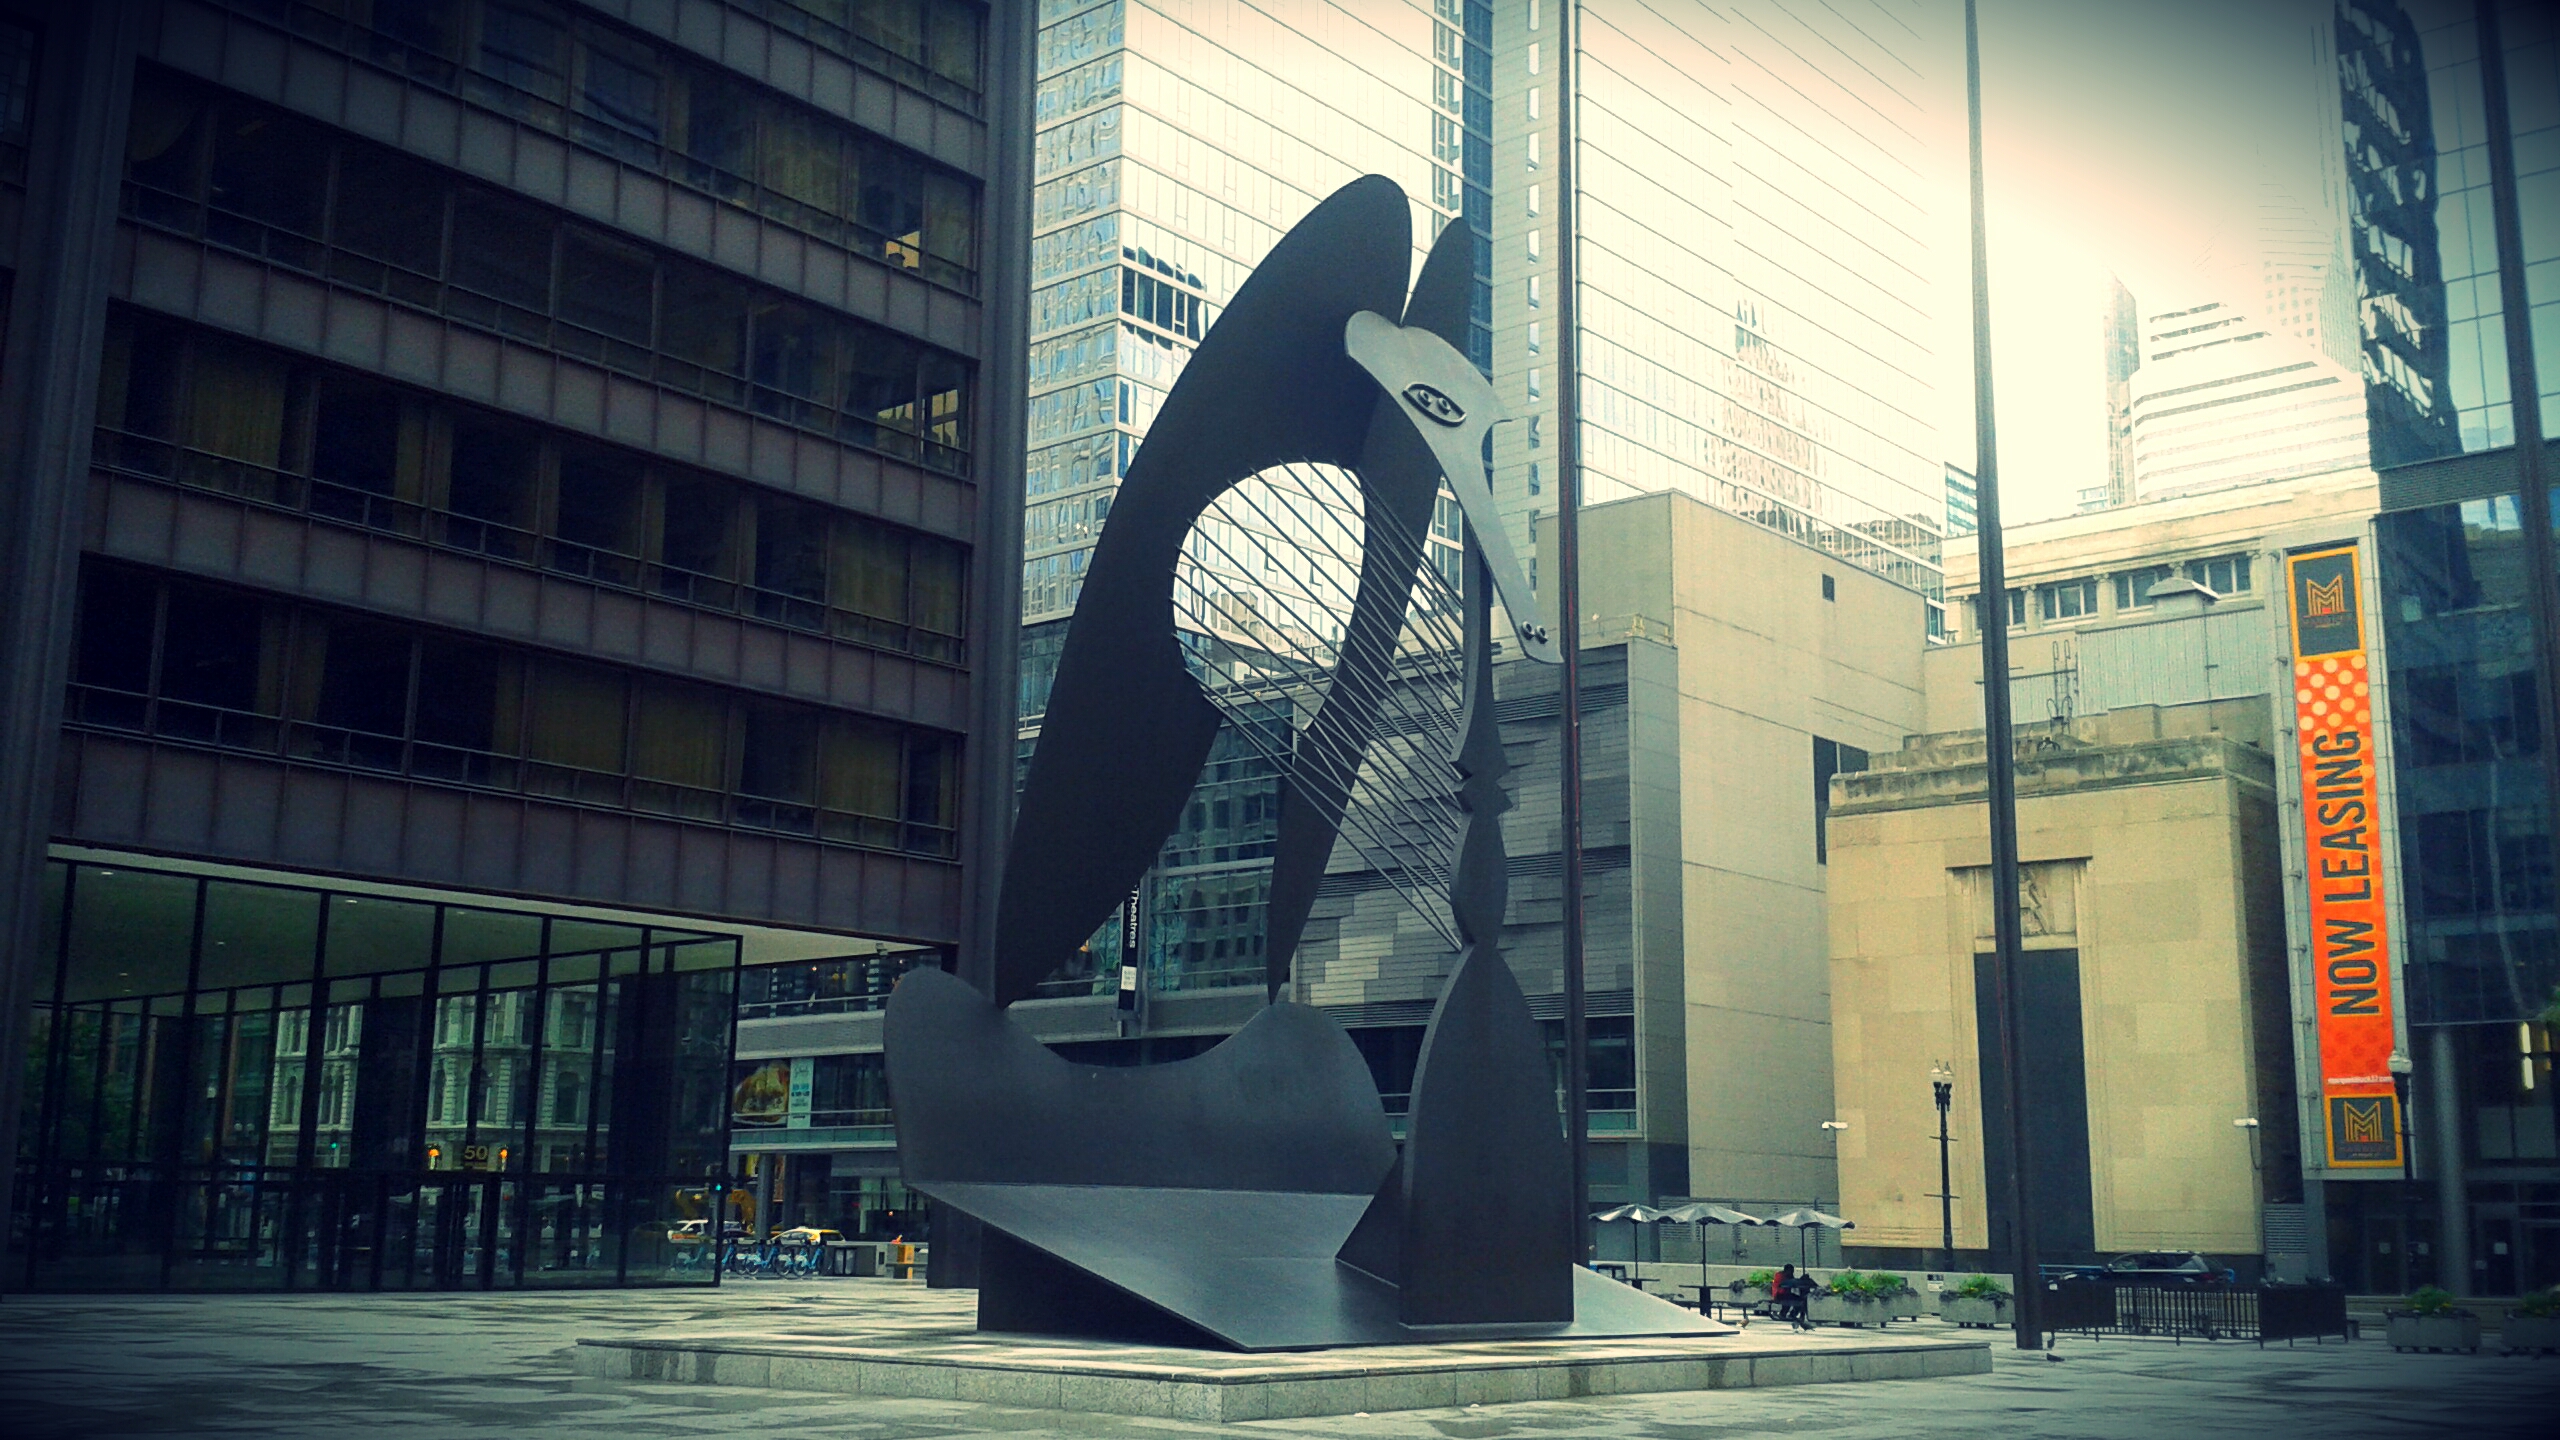 Baboon Chicago Picasso Sculpture 2560x1440